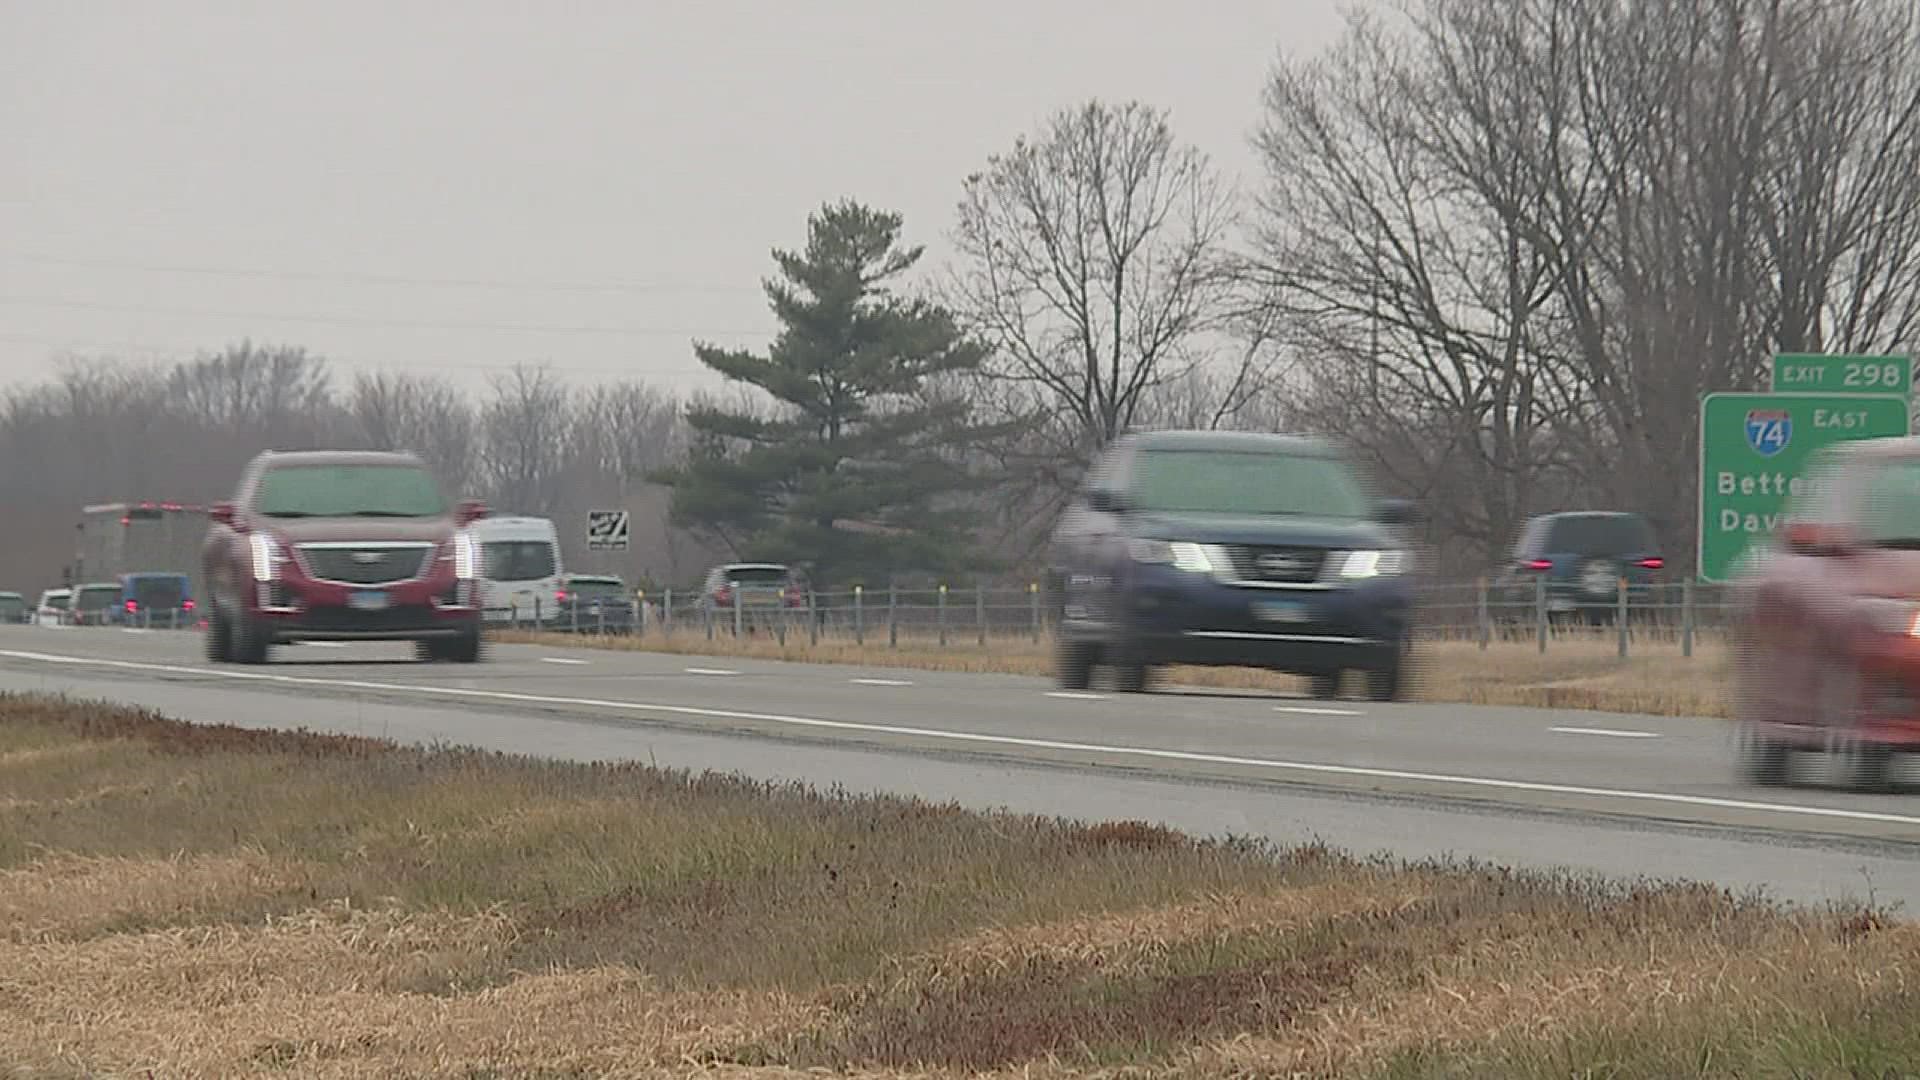 More than 100 million Americans were expected to hit the road this holiday season, according to AAA.